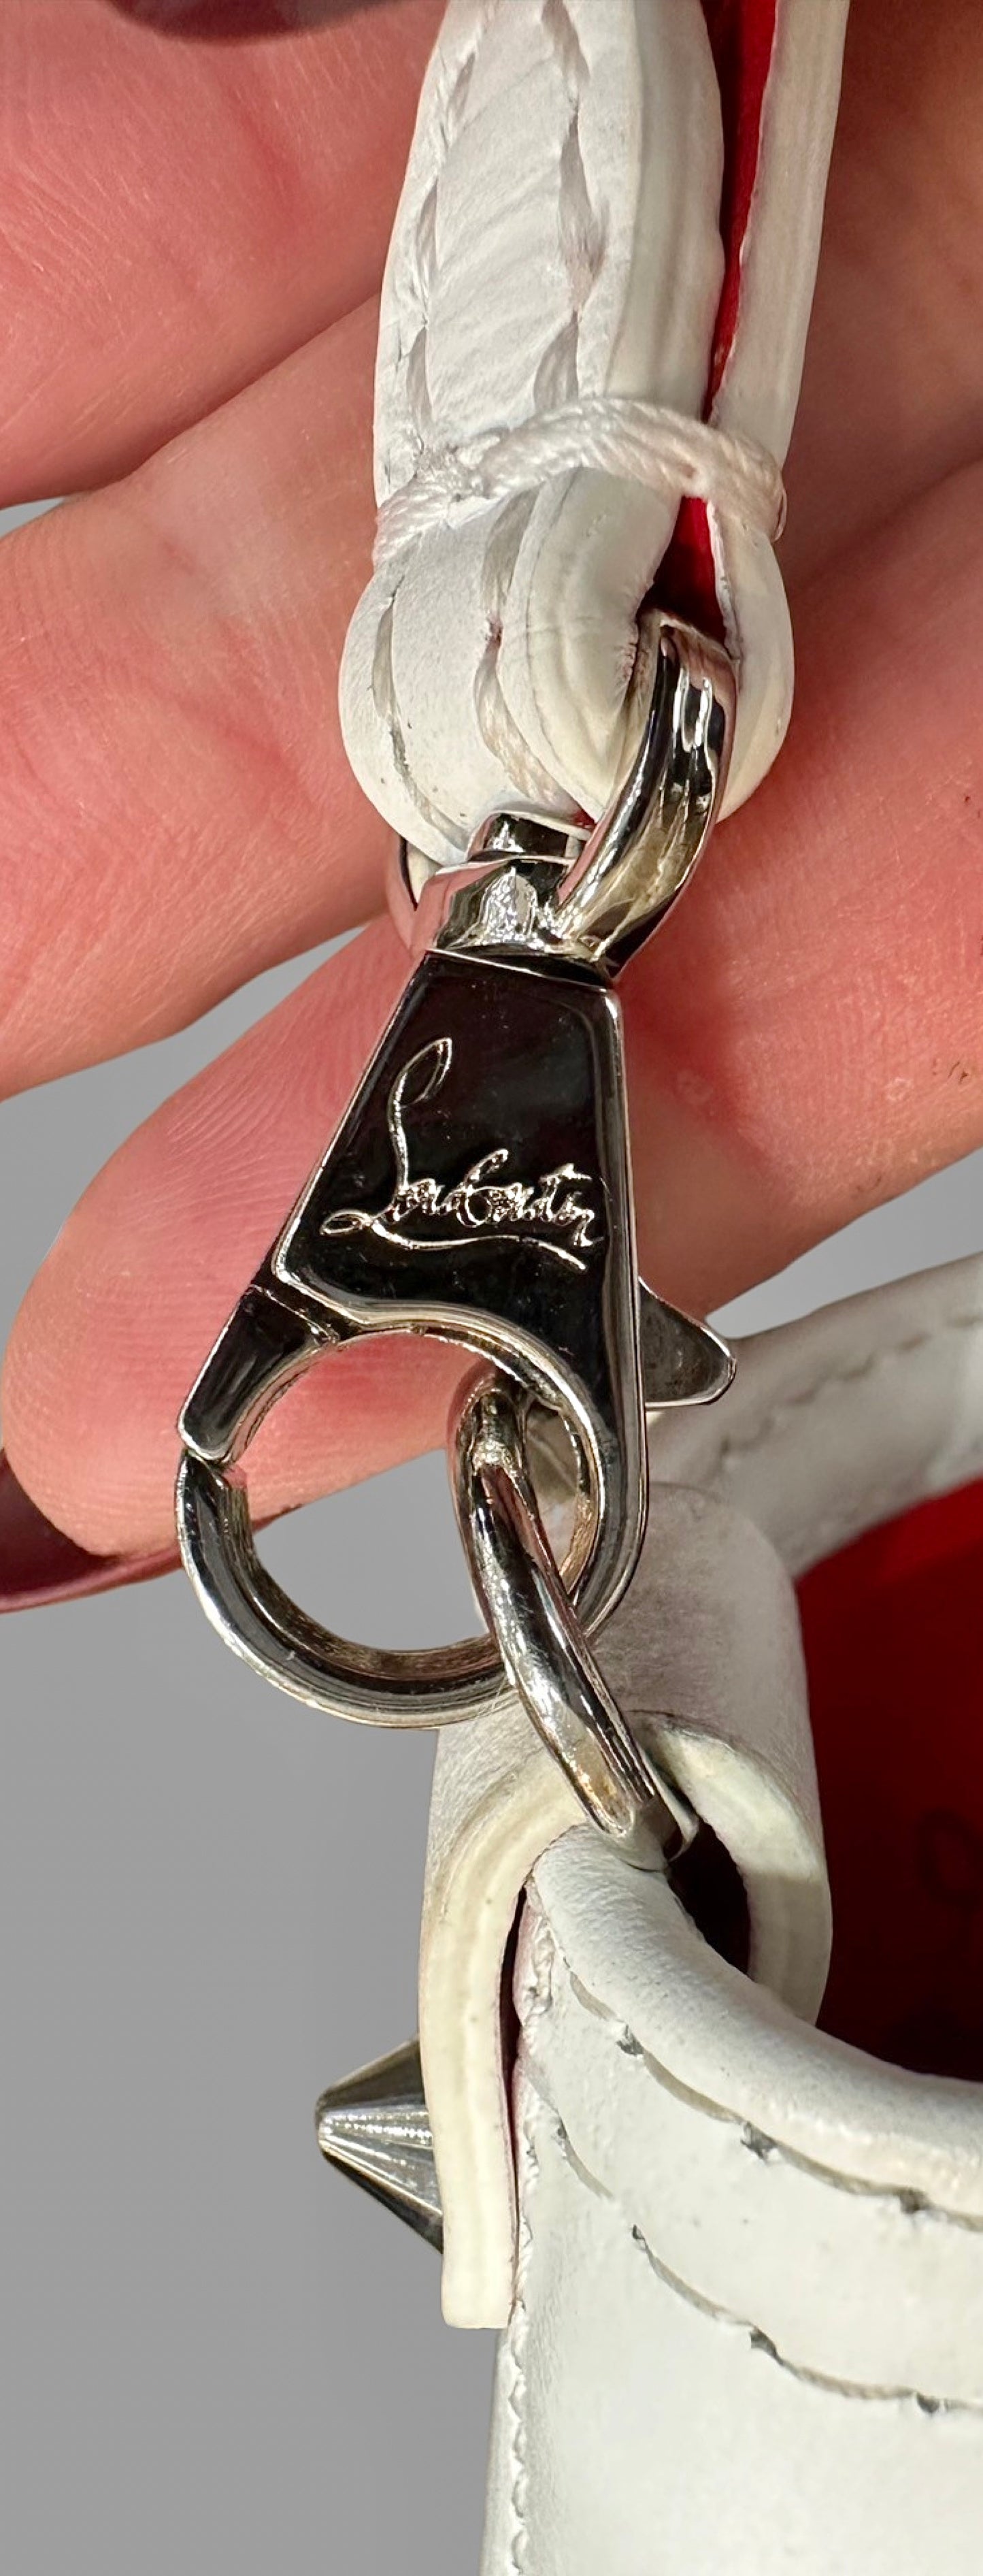 Close up of silver clasp on detachable strap with "Louboutin" signature